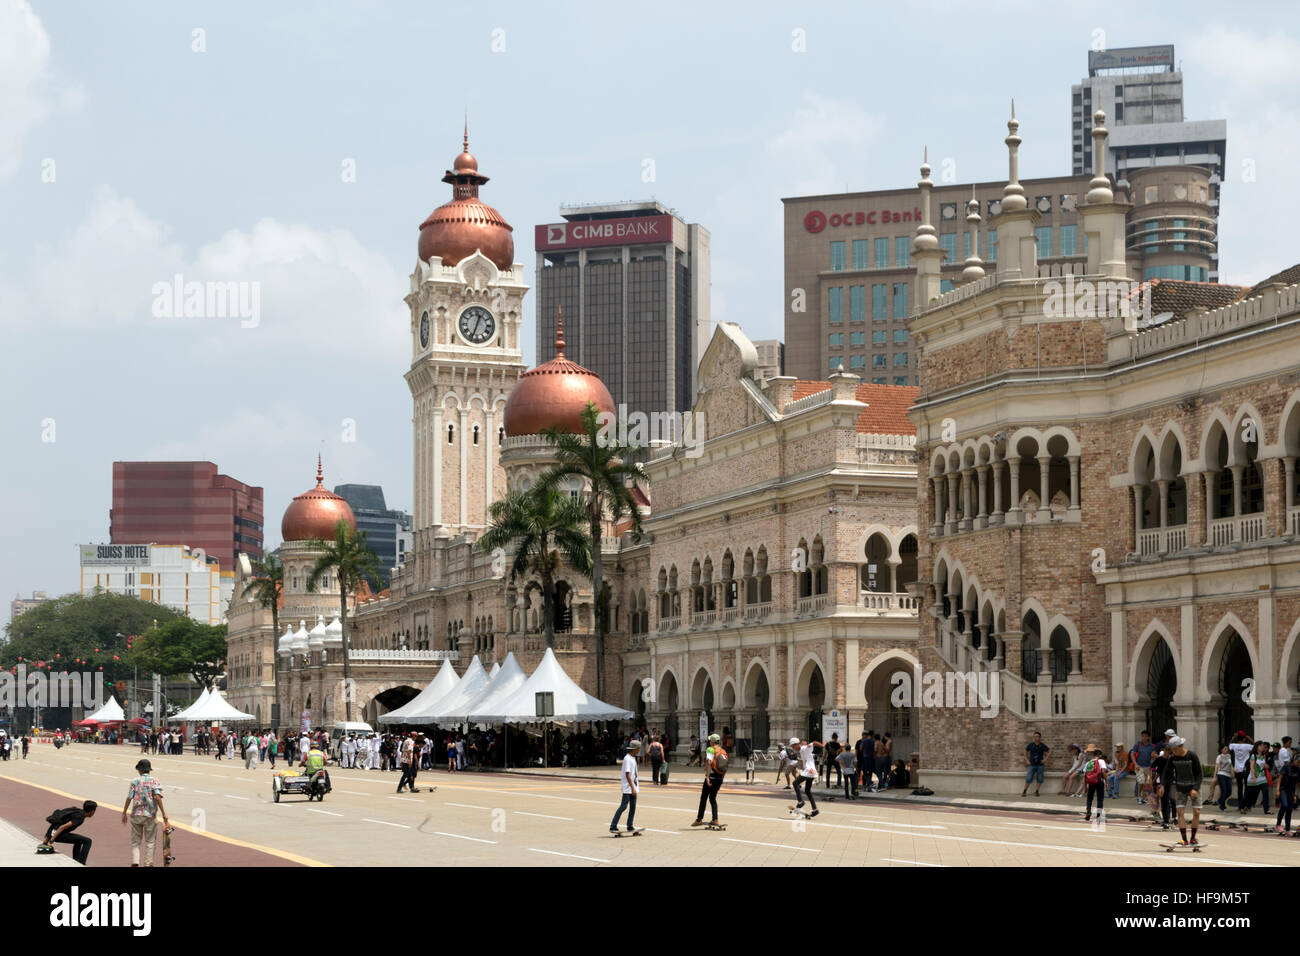 The Sultan Abdul Samad Building in Independence Square Kuala Lumpur Stock Photo